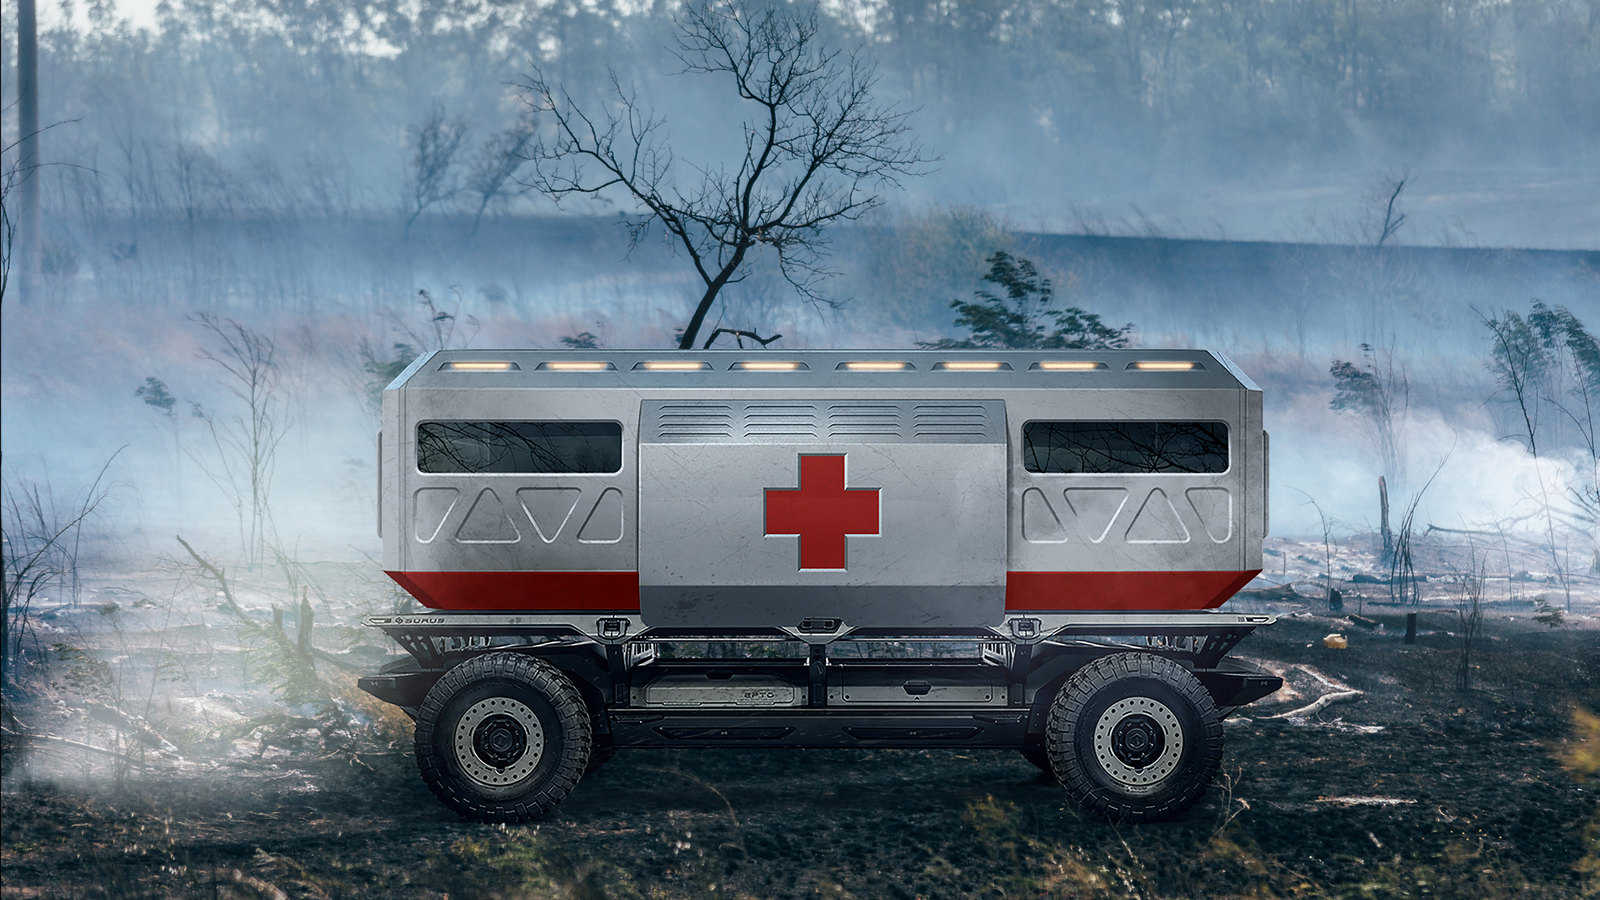 A rendering of the Silent Utility Rover Universal Superstructure (SURUS) platform with an ambulance to show the potential of flexible fuel cell solutions. SURUS was designed to form a foundation for a family of commercial vehicle solutions that leverages a single propulsion system integrated into a common chassis.